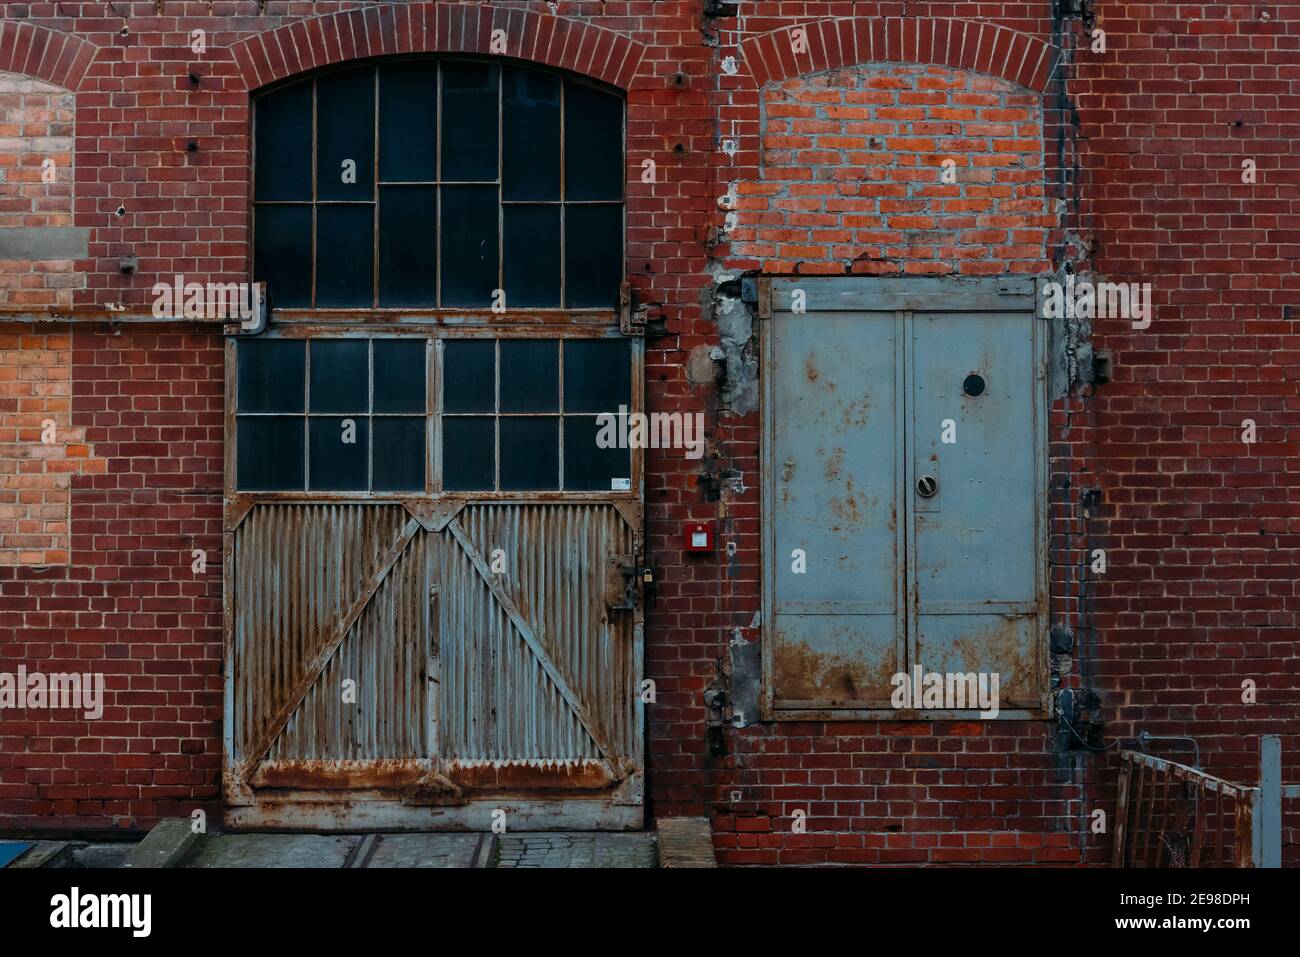 An old rusty gate of an old warehouse, old brick warehouse, brick facade and an old gate Stock Photo